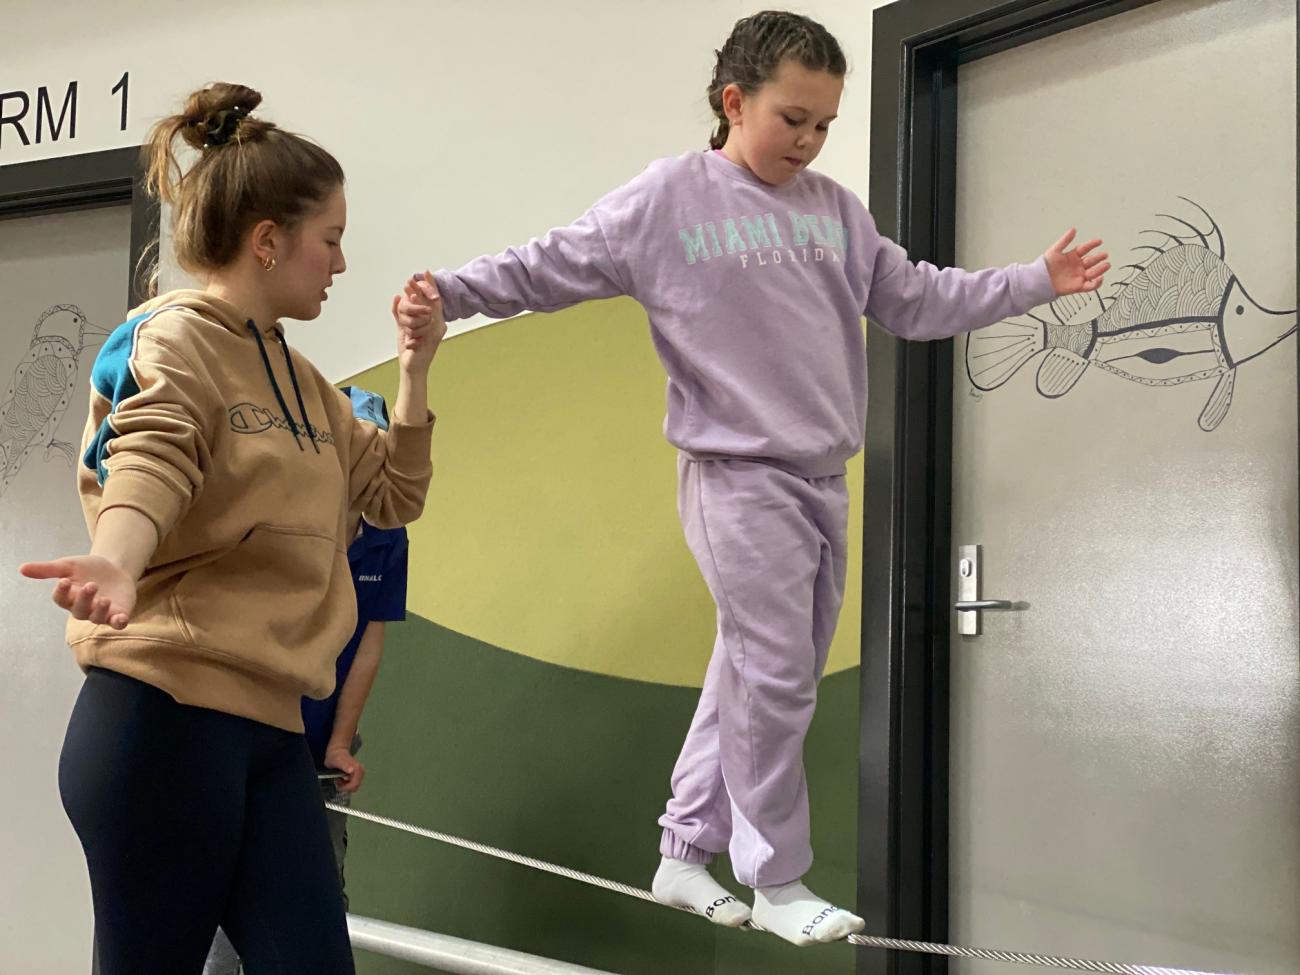 young student walking on tightrope assisted by older student